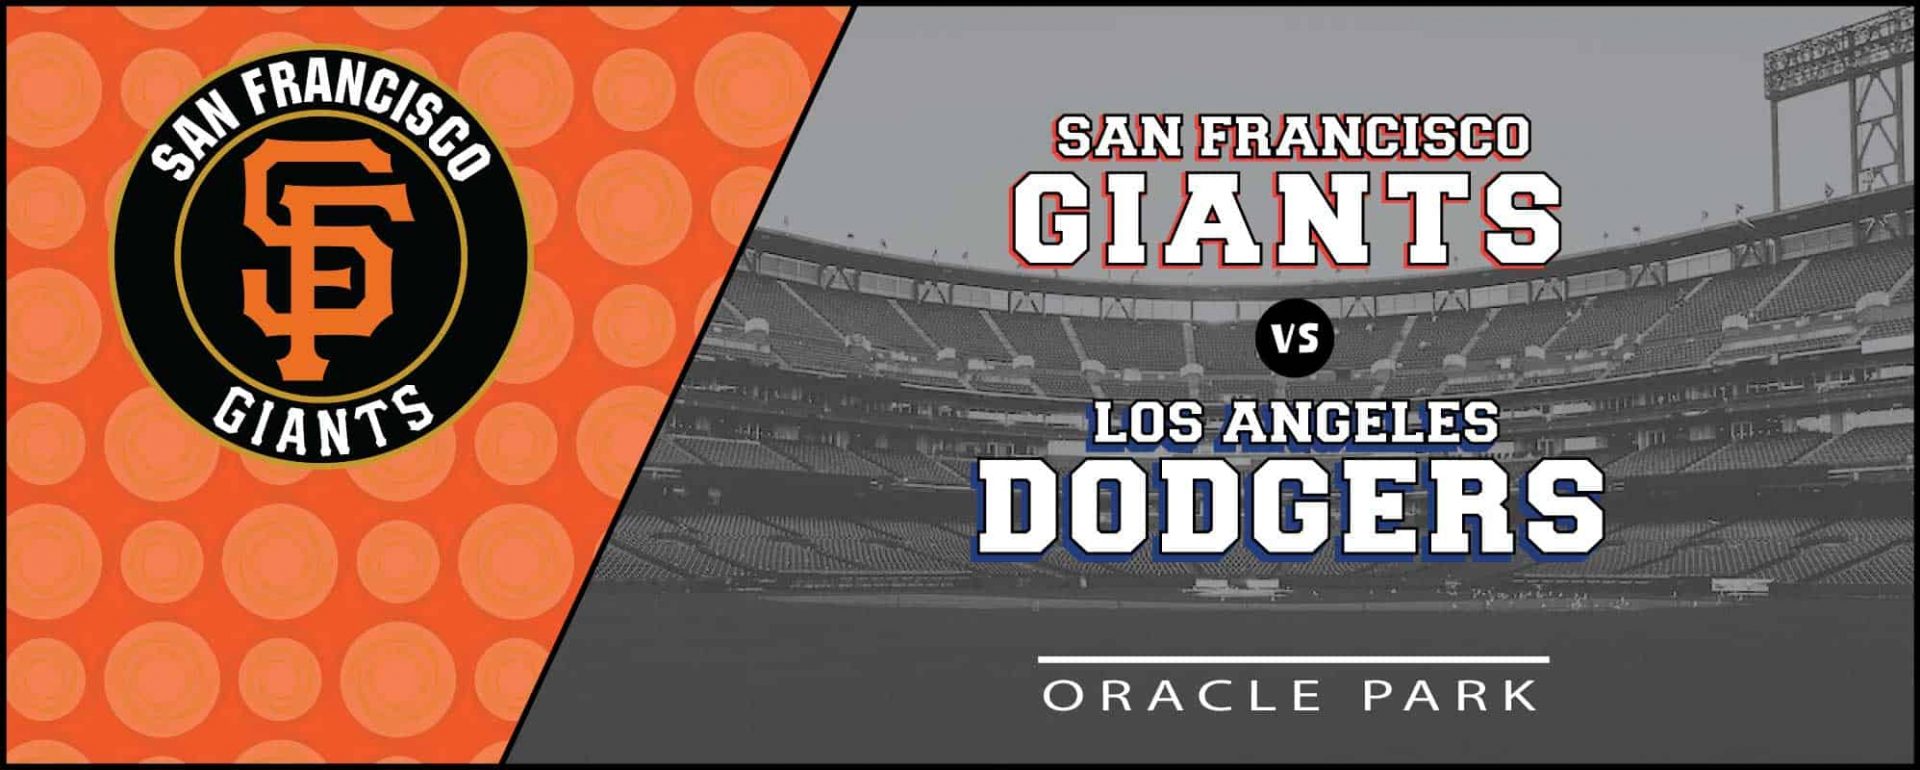 Giants vs. Dodgers at Oracle Park